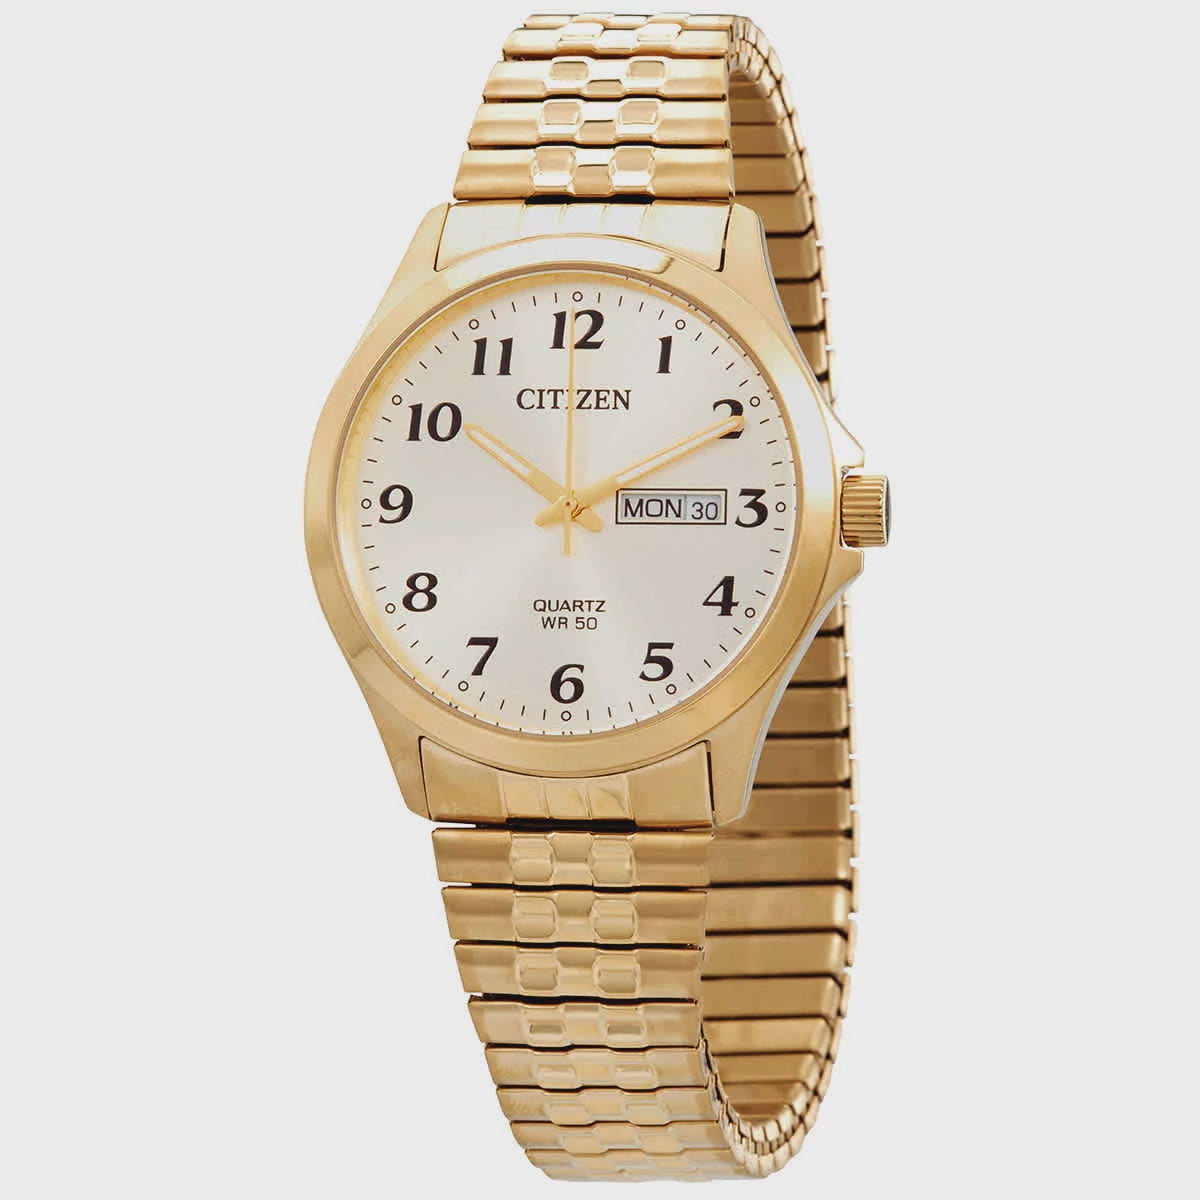 Gents Gold Coloured Citizen Watch BF5002-99P